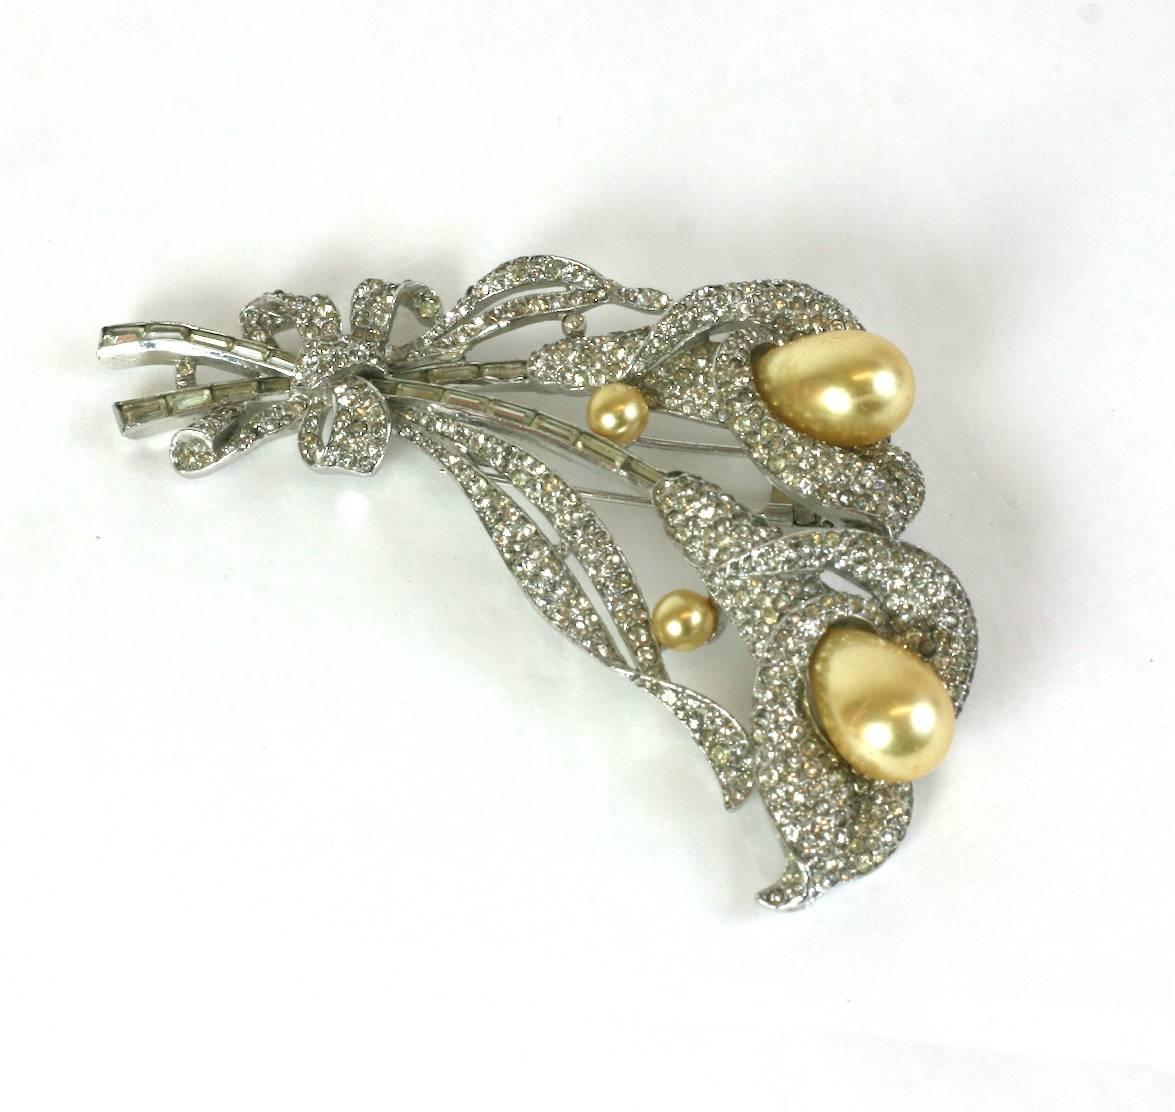 Impressive, large and rare Trifari Double Calla Lily Brooch with large faux pear shaped pearls, pearl cabochons, and vari size rectangular baguettes within intricate pave work surrounds. Designed by Alfred Philippe for Trifari. Double clip back